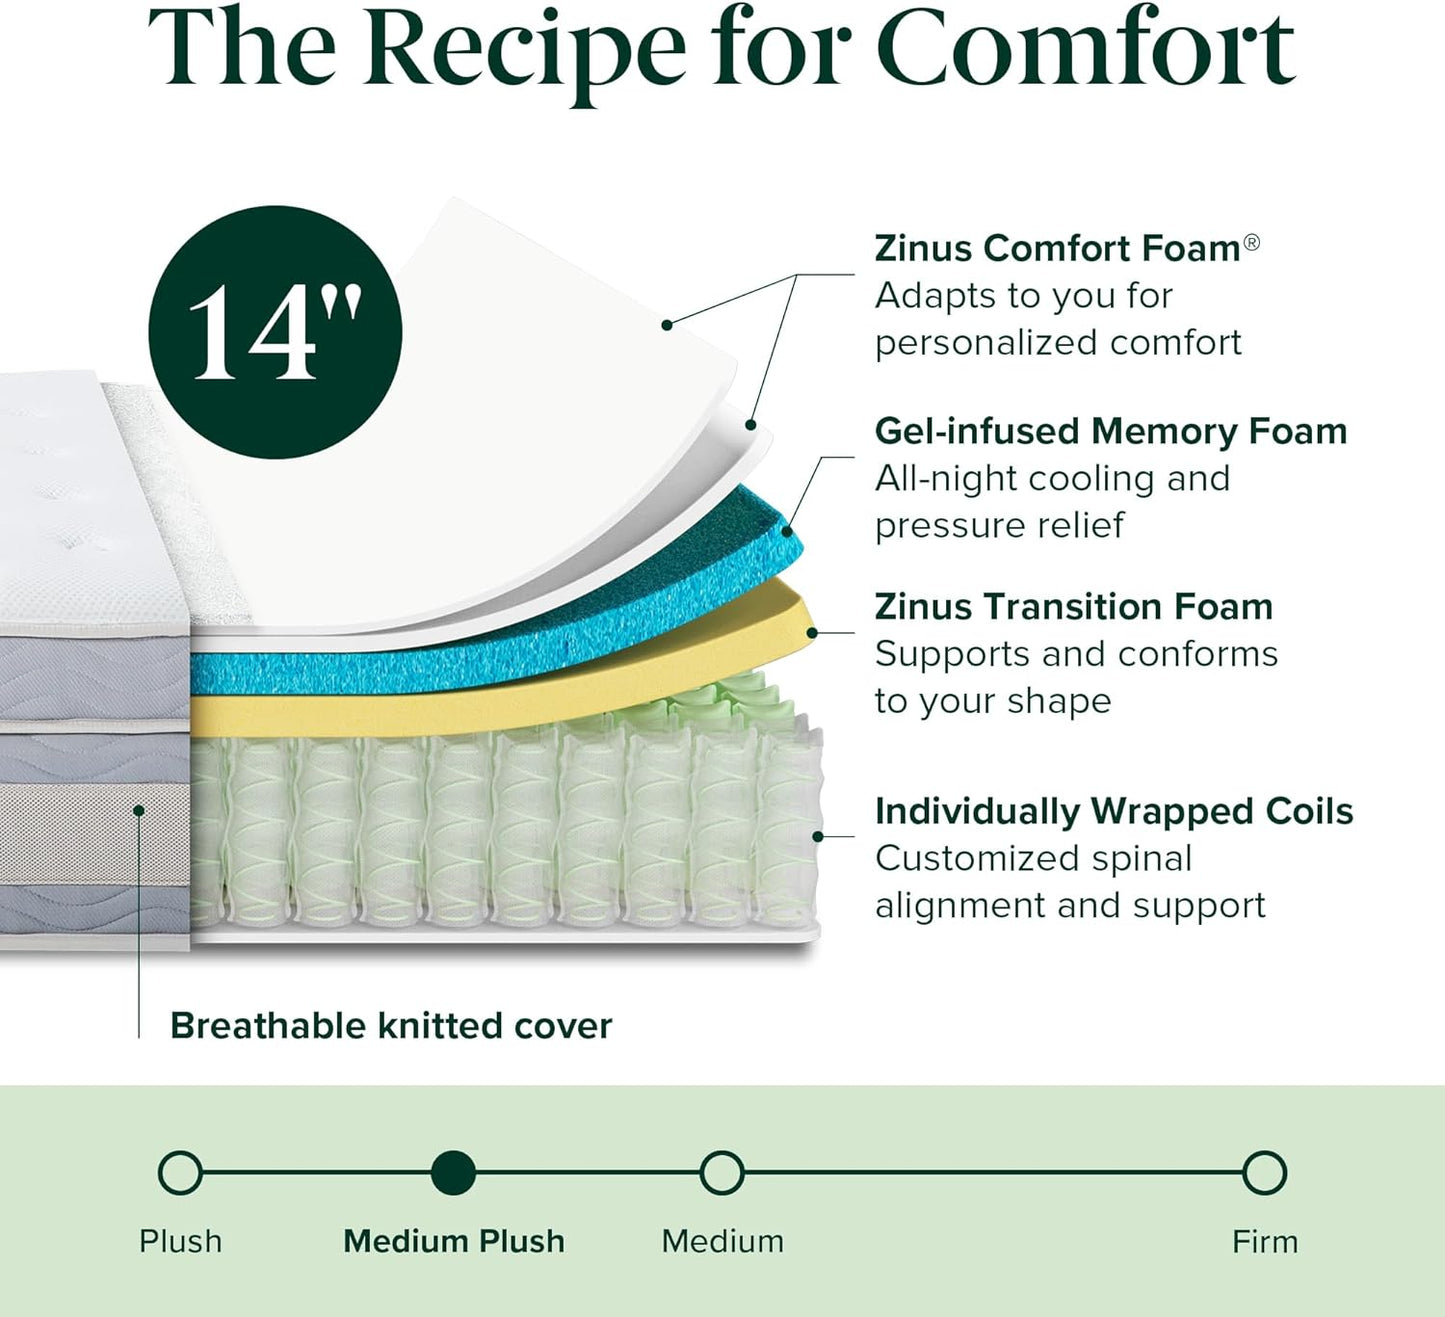 NEW - Zinus KING 14 Inch Cooling Comfort Support Hybrid Mattress [New Version], Fiberglass Free, Medium Plush, Cooling Motion Isolation, Certified Safe Foams & Fabric, Bed-in-A-Box, King - Retail $399